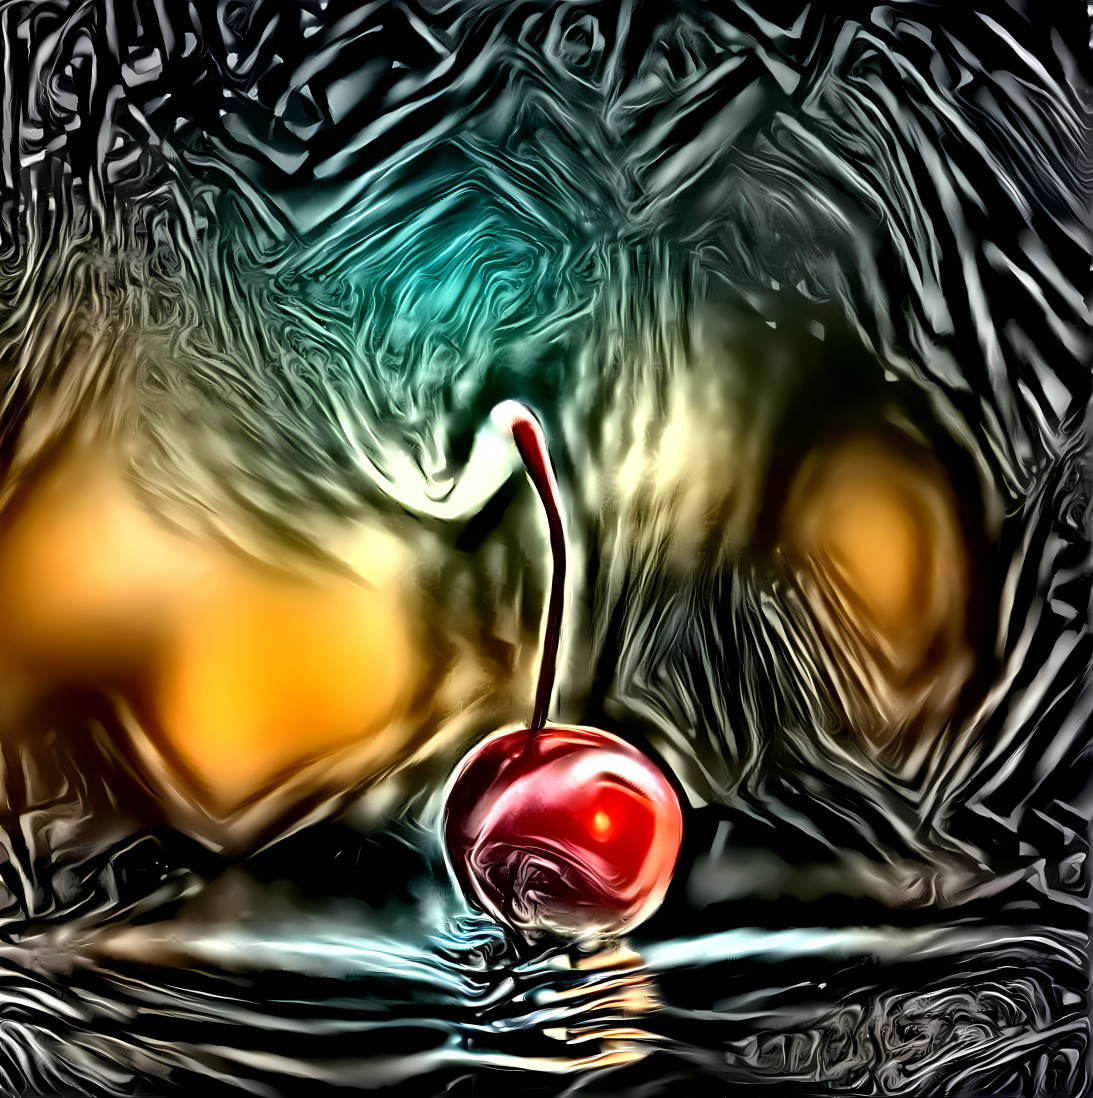 The generated cherry